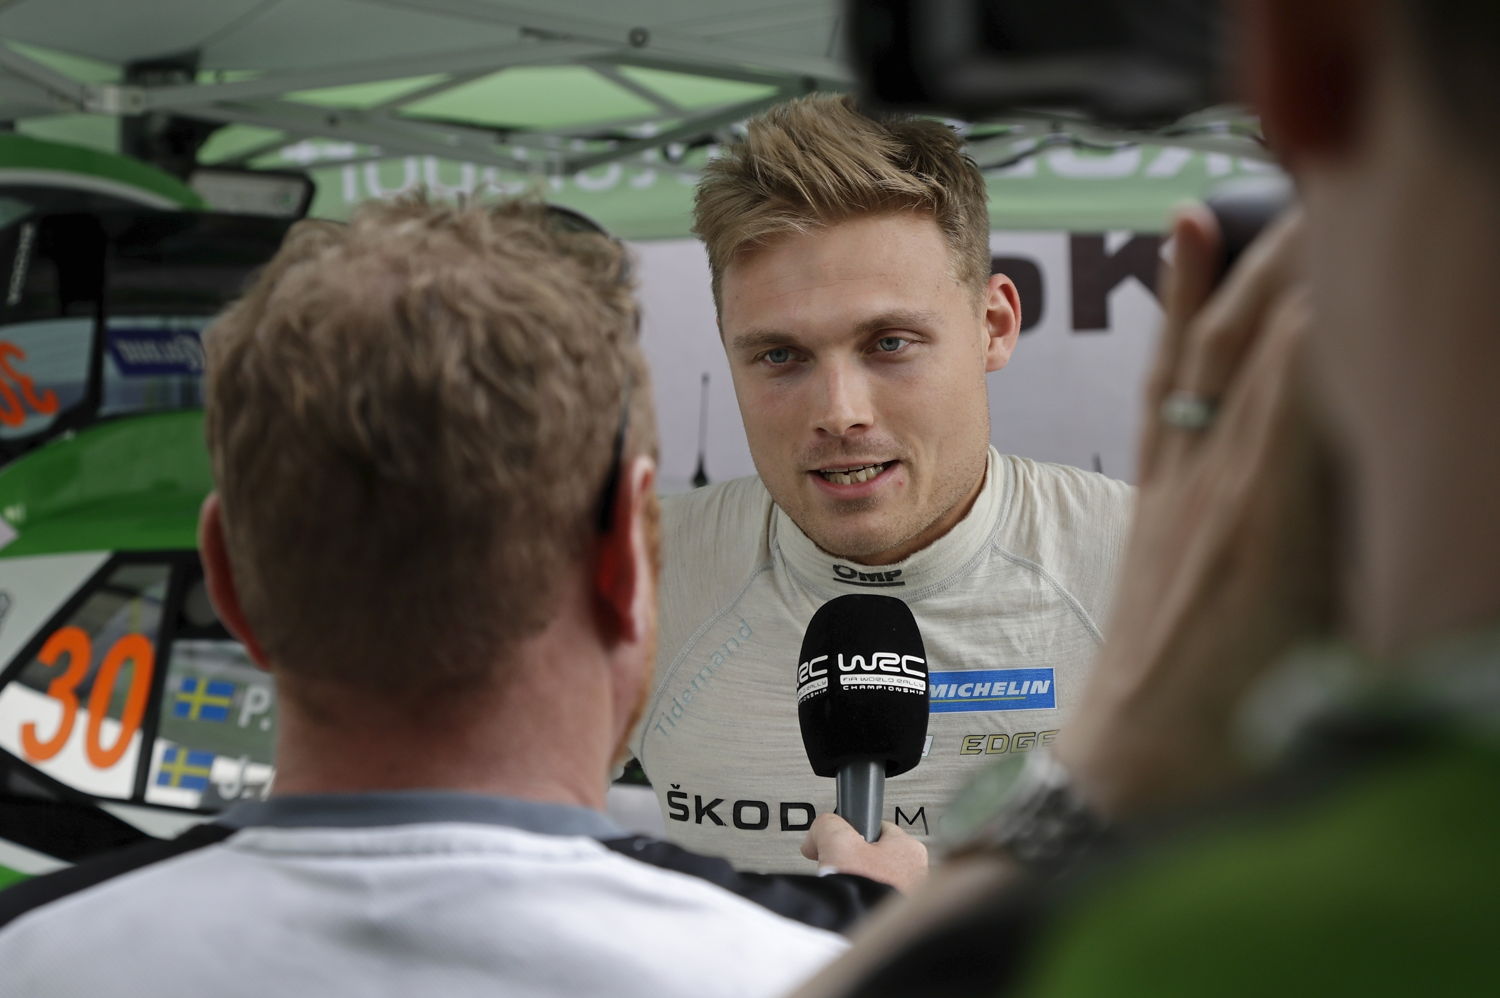 Pontus Tidemand was once again the focus of media attention in Mexico.